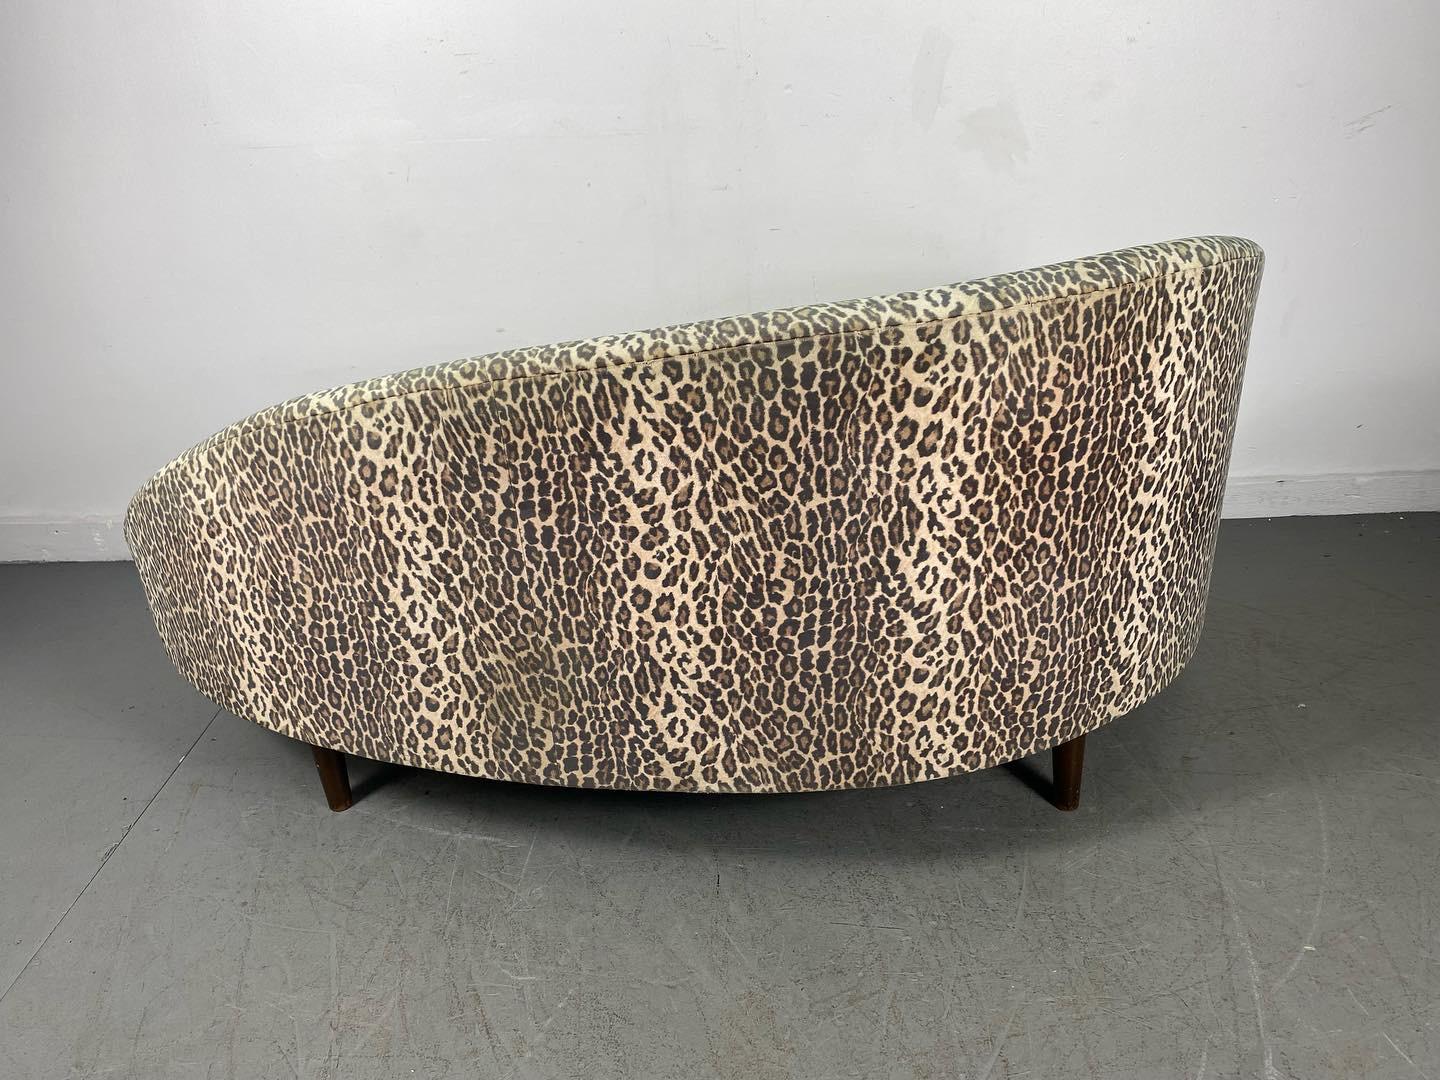 Stunning Mid-Century Modernist chaise lounge designed by Adrian Pearsall for Craft Associated. Retains original Leopard patterned upholstery, great original condition, original castors no longer present, great ovoid design, extremely comfortable,